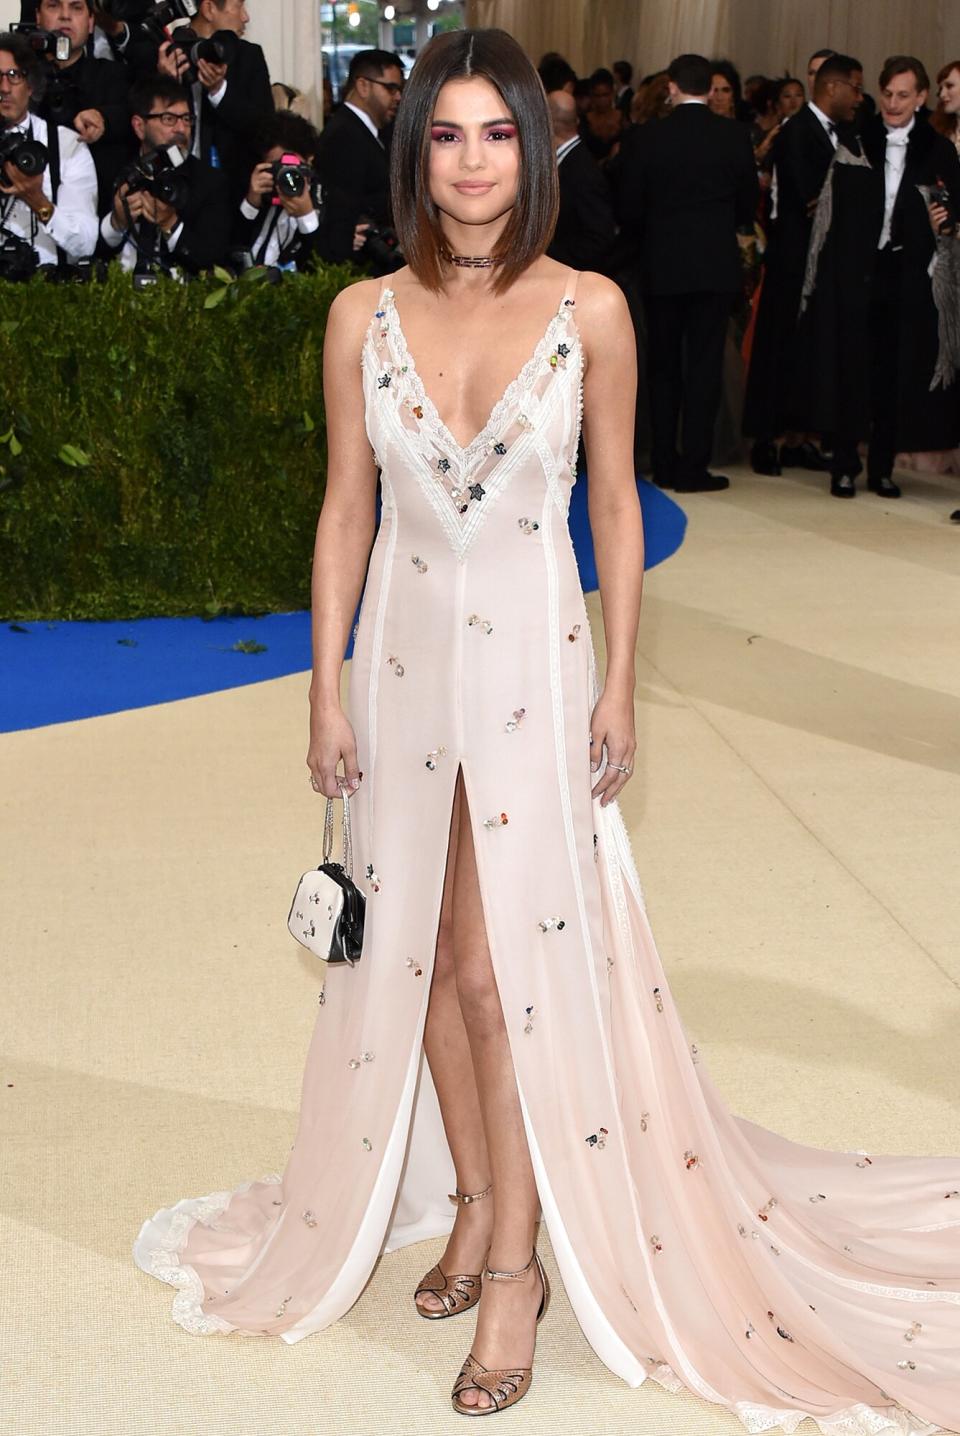 Selena Gomez attends "Rei Kawakubo/Comme des Garcons: Art Of The In-Between" Costume Institute Gala at Metropolitan Museum of Art on May 1, 2017 in New York City